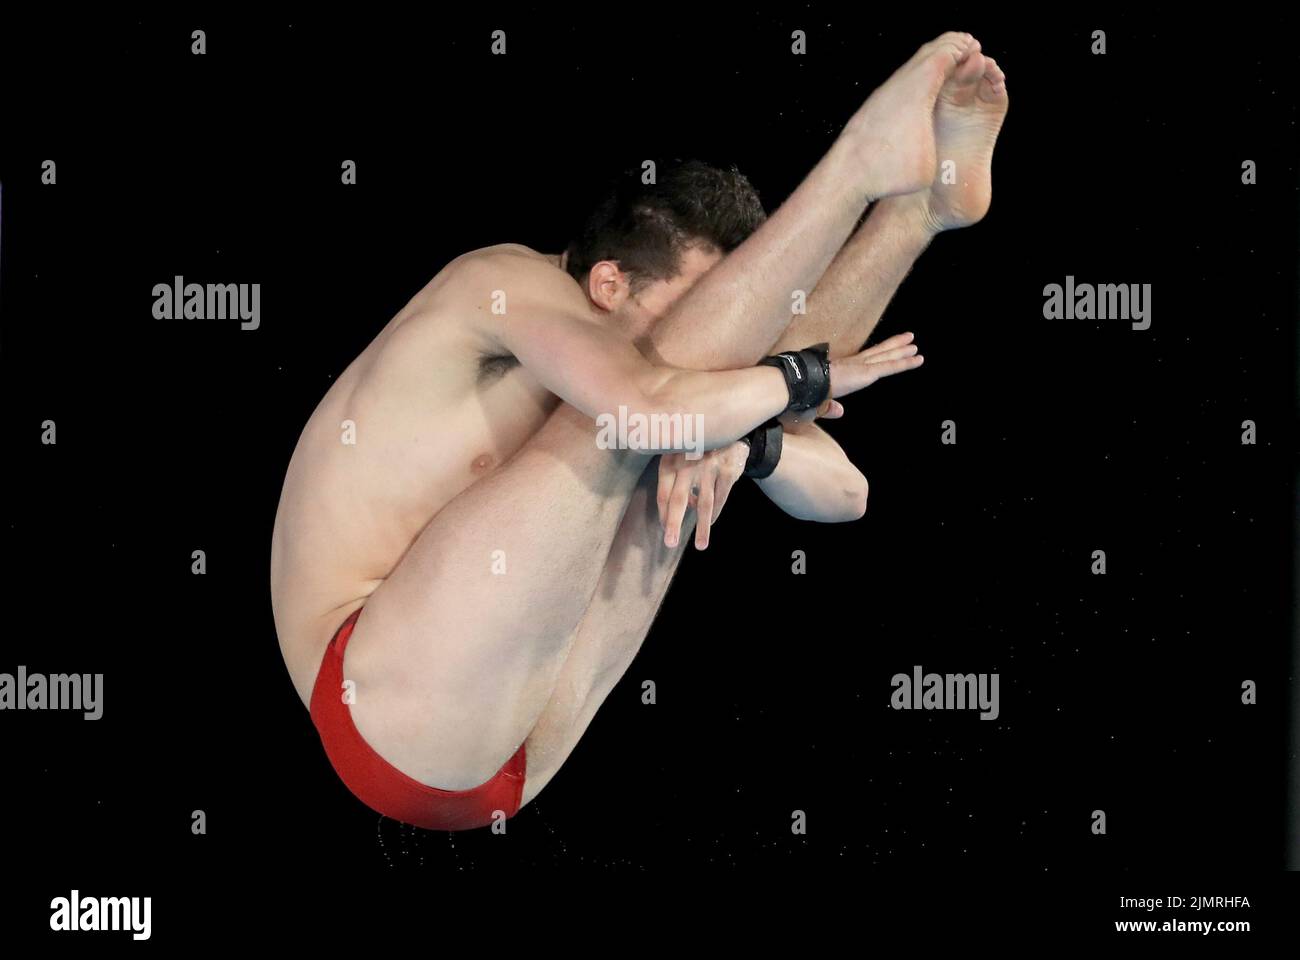 Wales’ Aidan Heslop in action during the Men’s 10m Platform Final at Sandwell Aquatics Centre on day ten of the 2022 Commonwealth Games in Birmingham. Picture date: Sunday August 7, 2022. Stock Photo